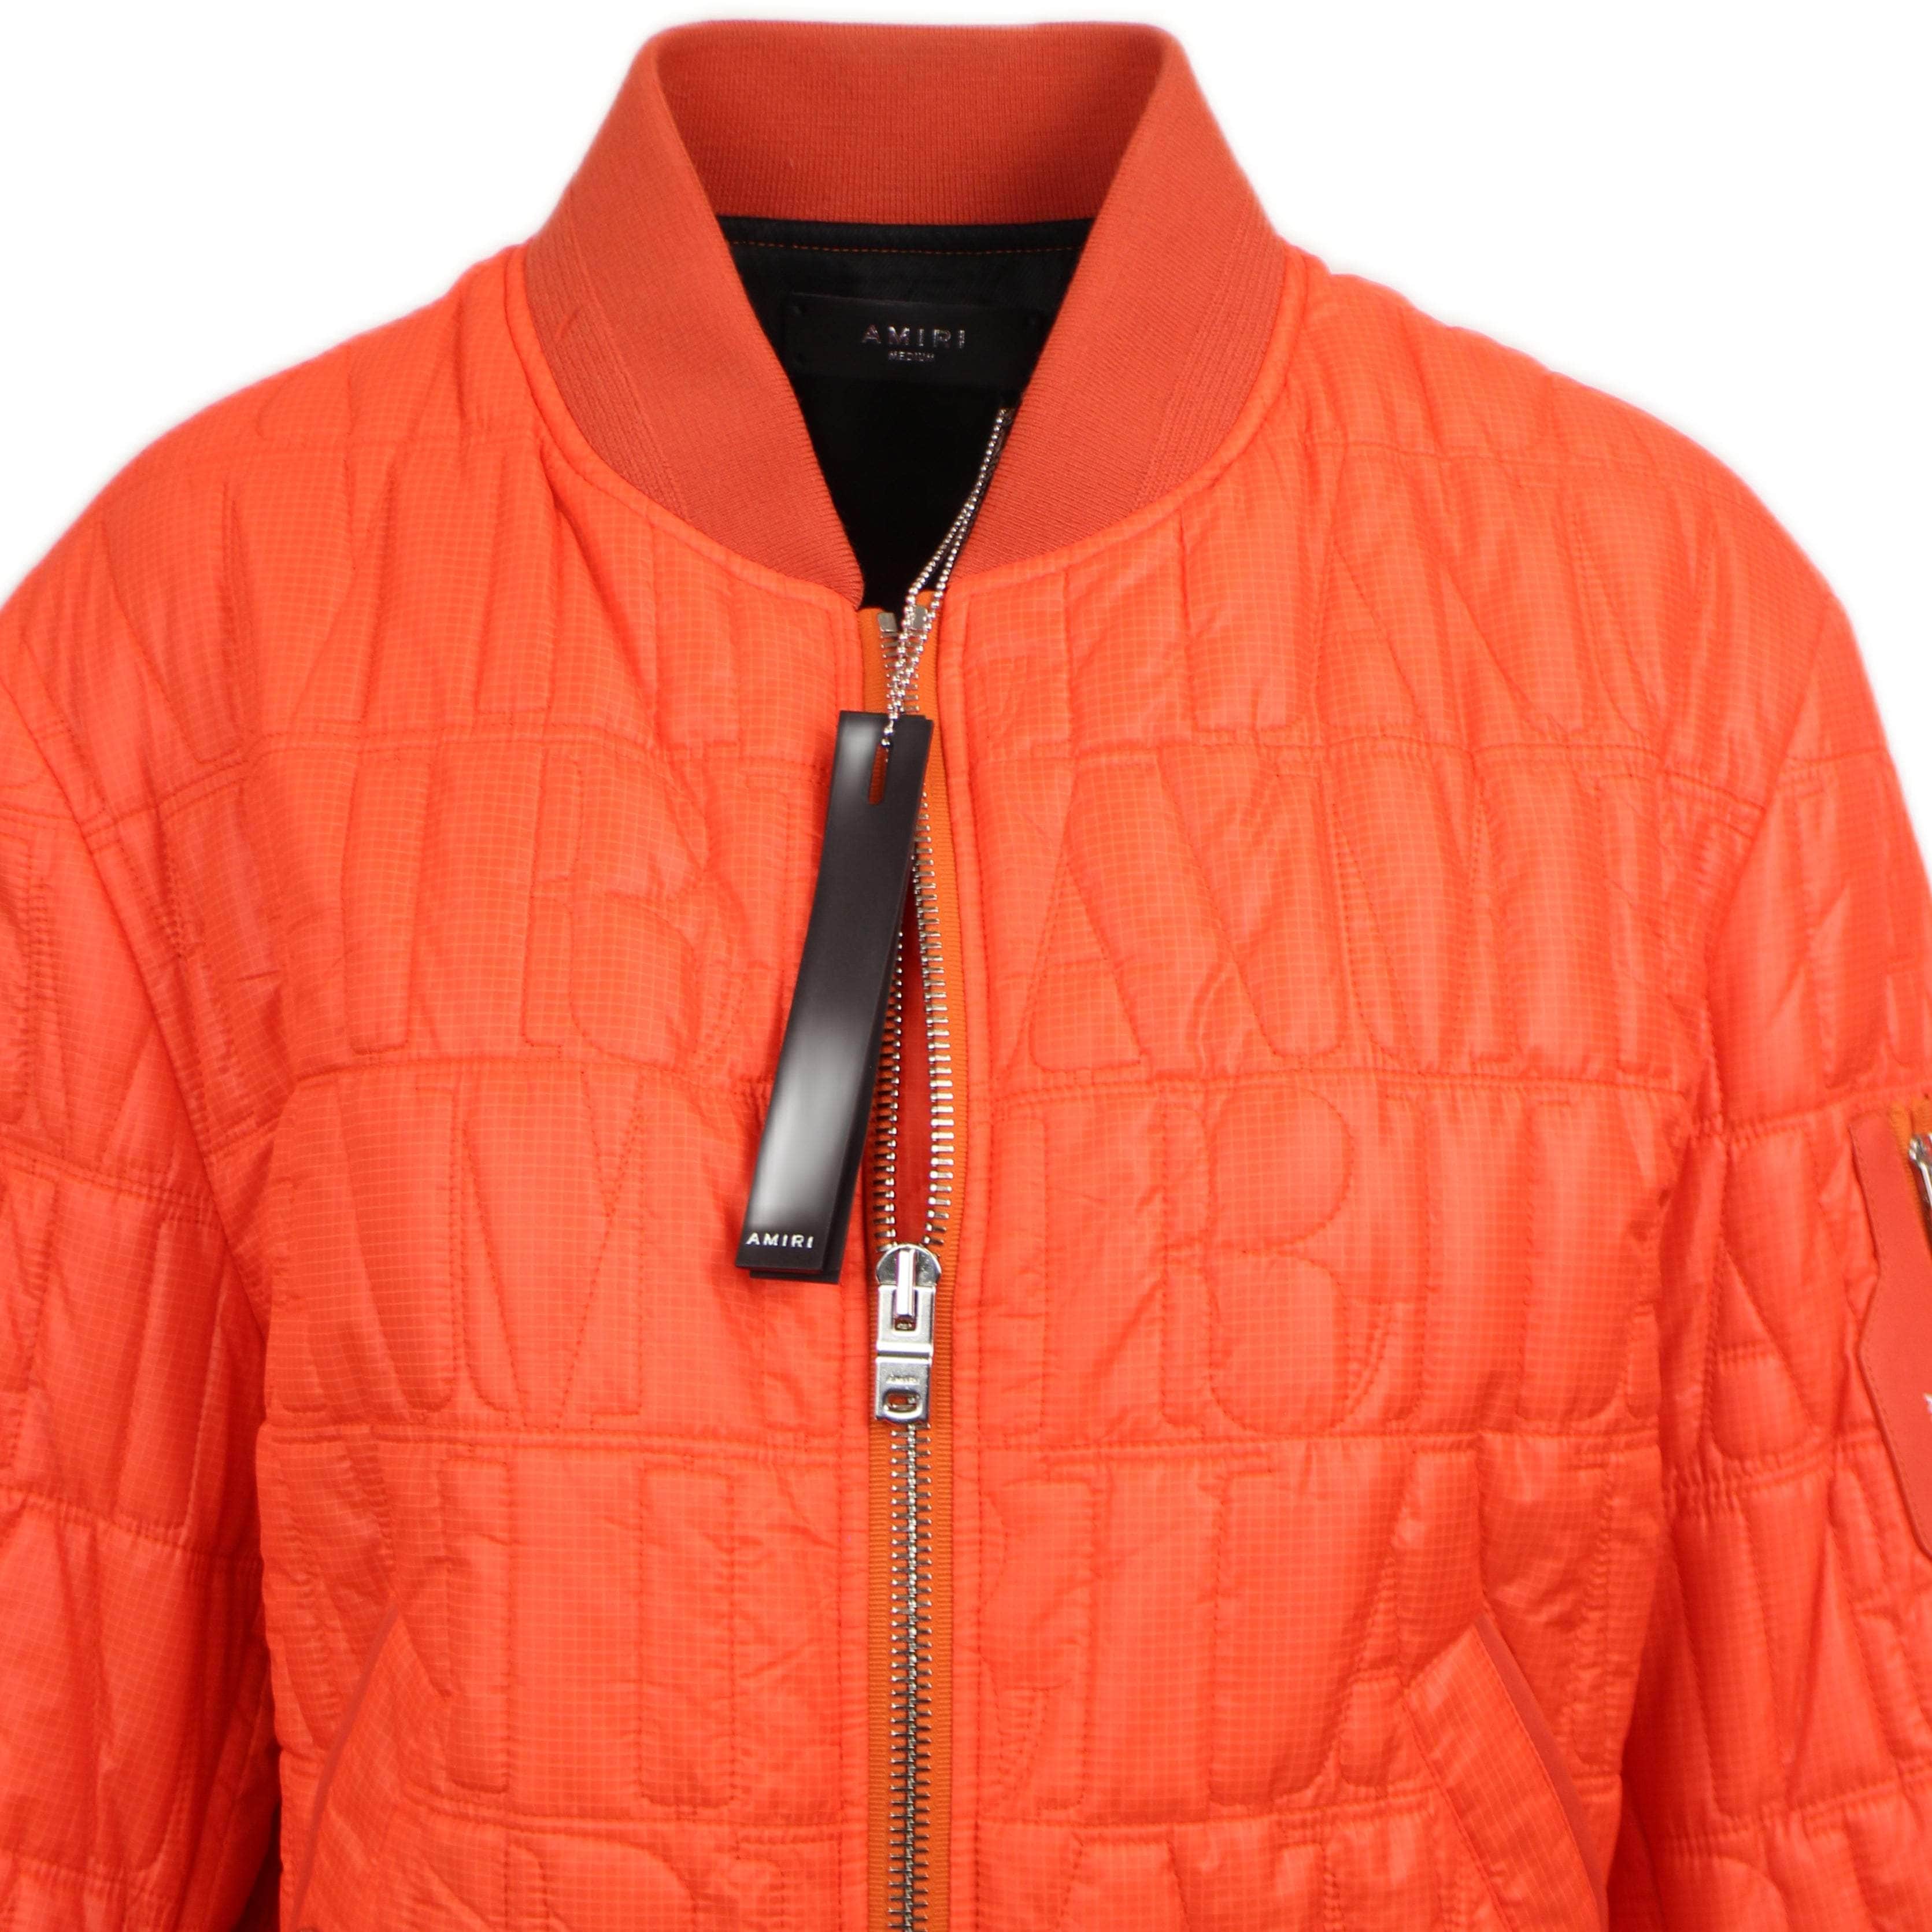 Amiri 1000-2000, amiri, channelenable-all, chicmi, couponcollection, main-clothing, mens-bombers, shop375, Stadium Goods Orange QUILTED LOGO Jacket Bomber